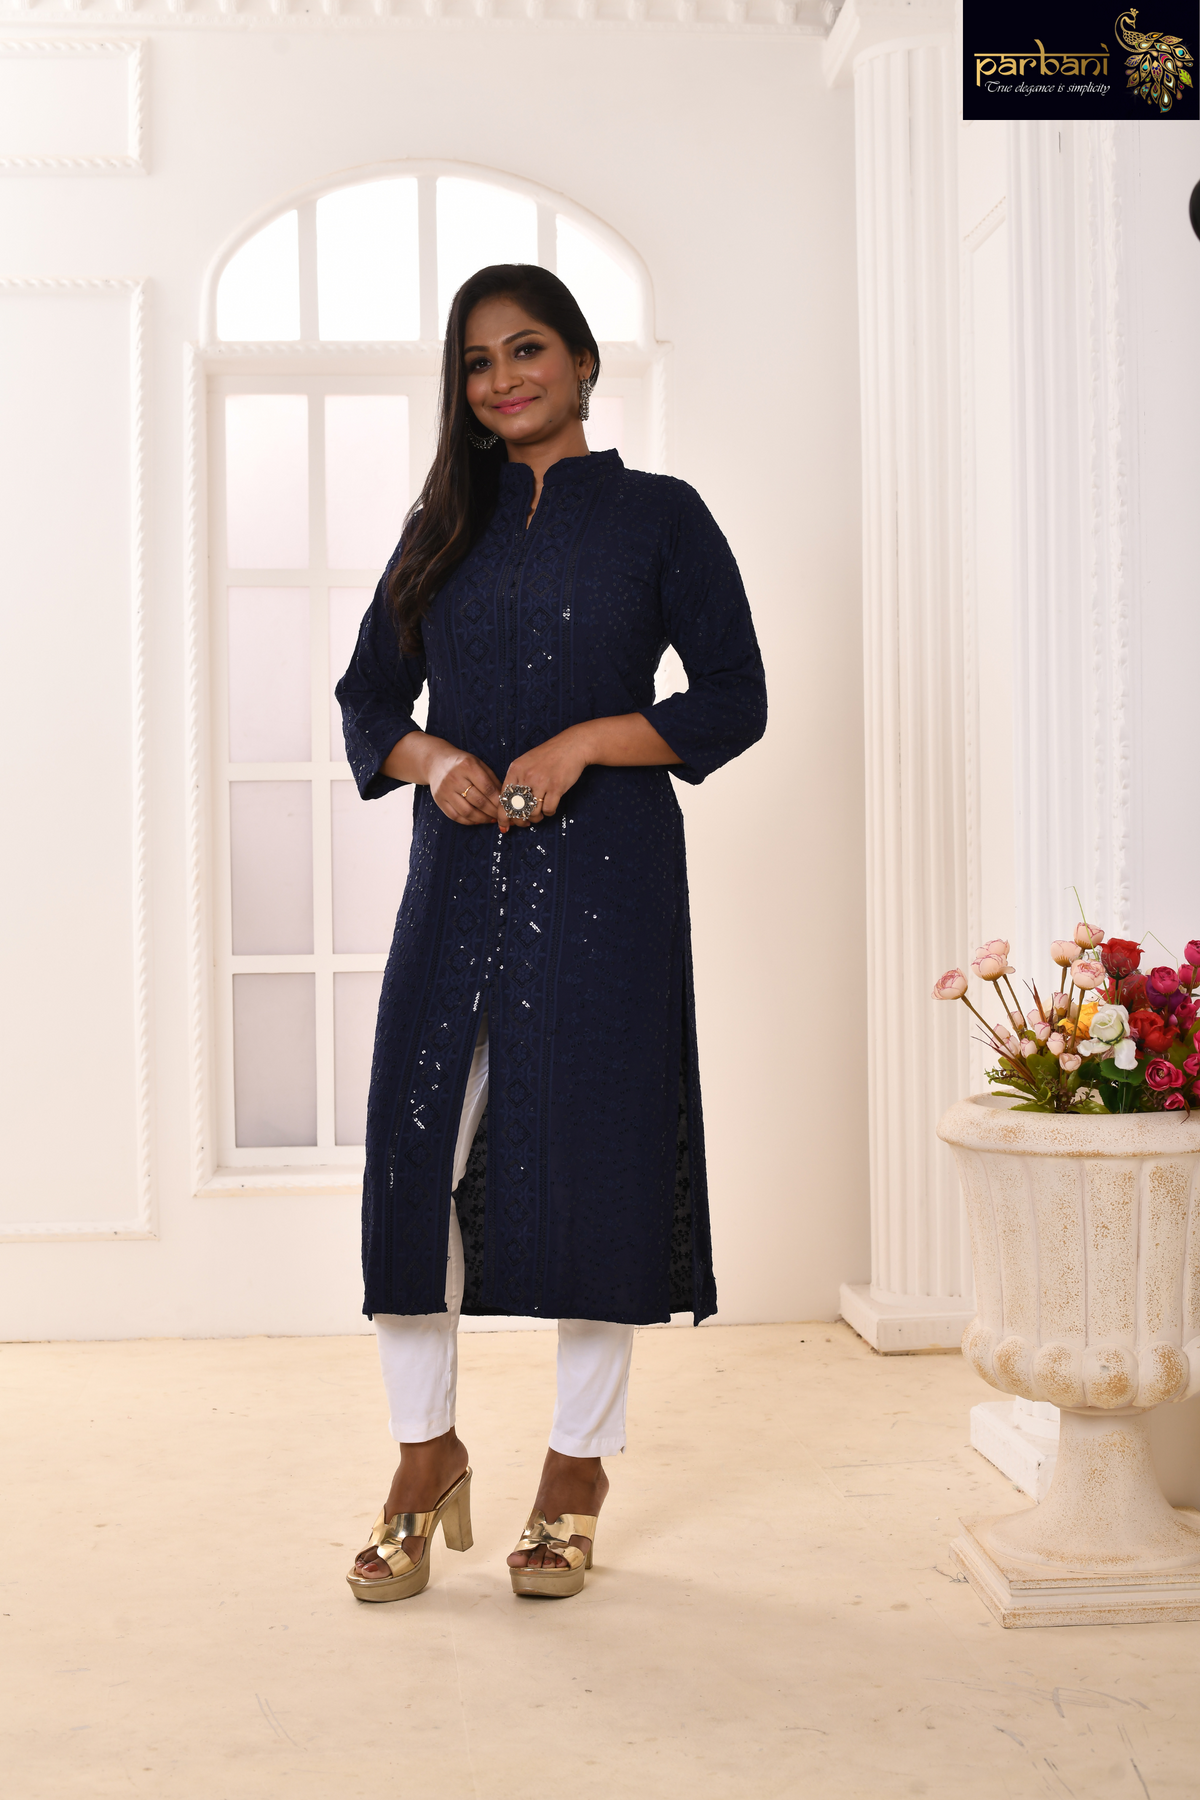 Buy Om Creation Women's Rayon A-Line Plain Kurtis. Navy Blue at Amazon.in